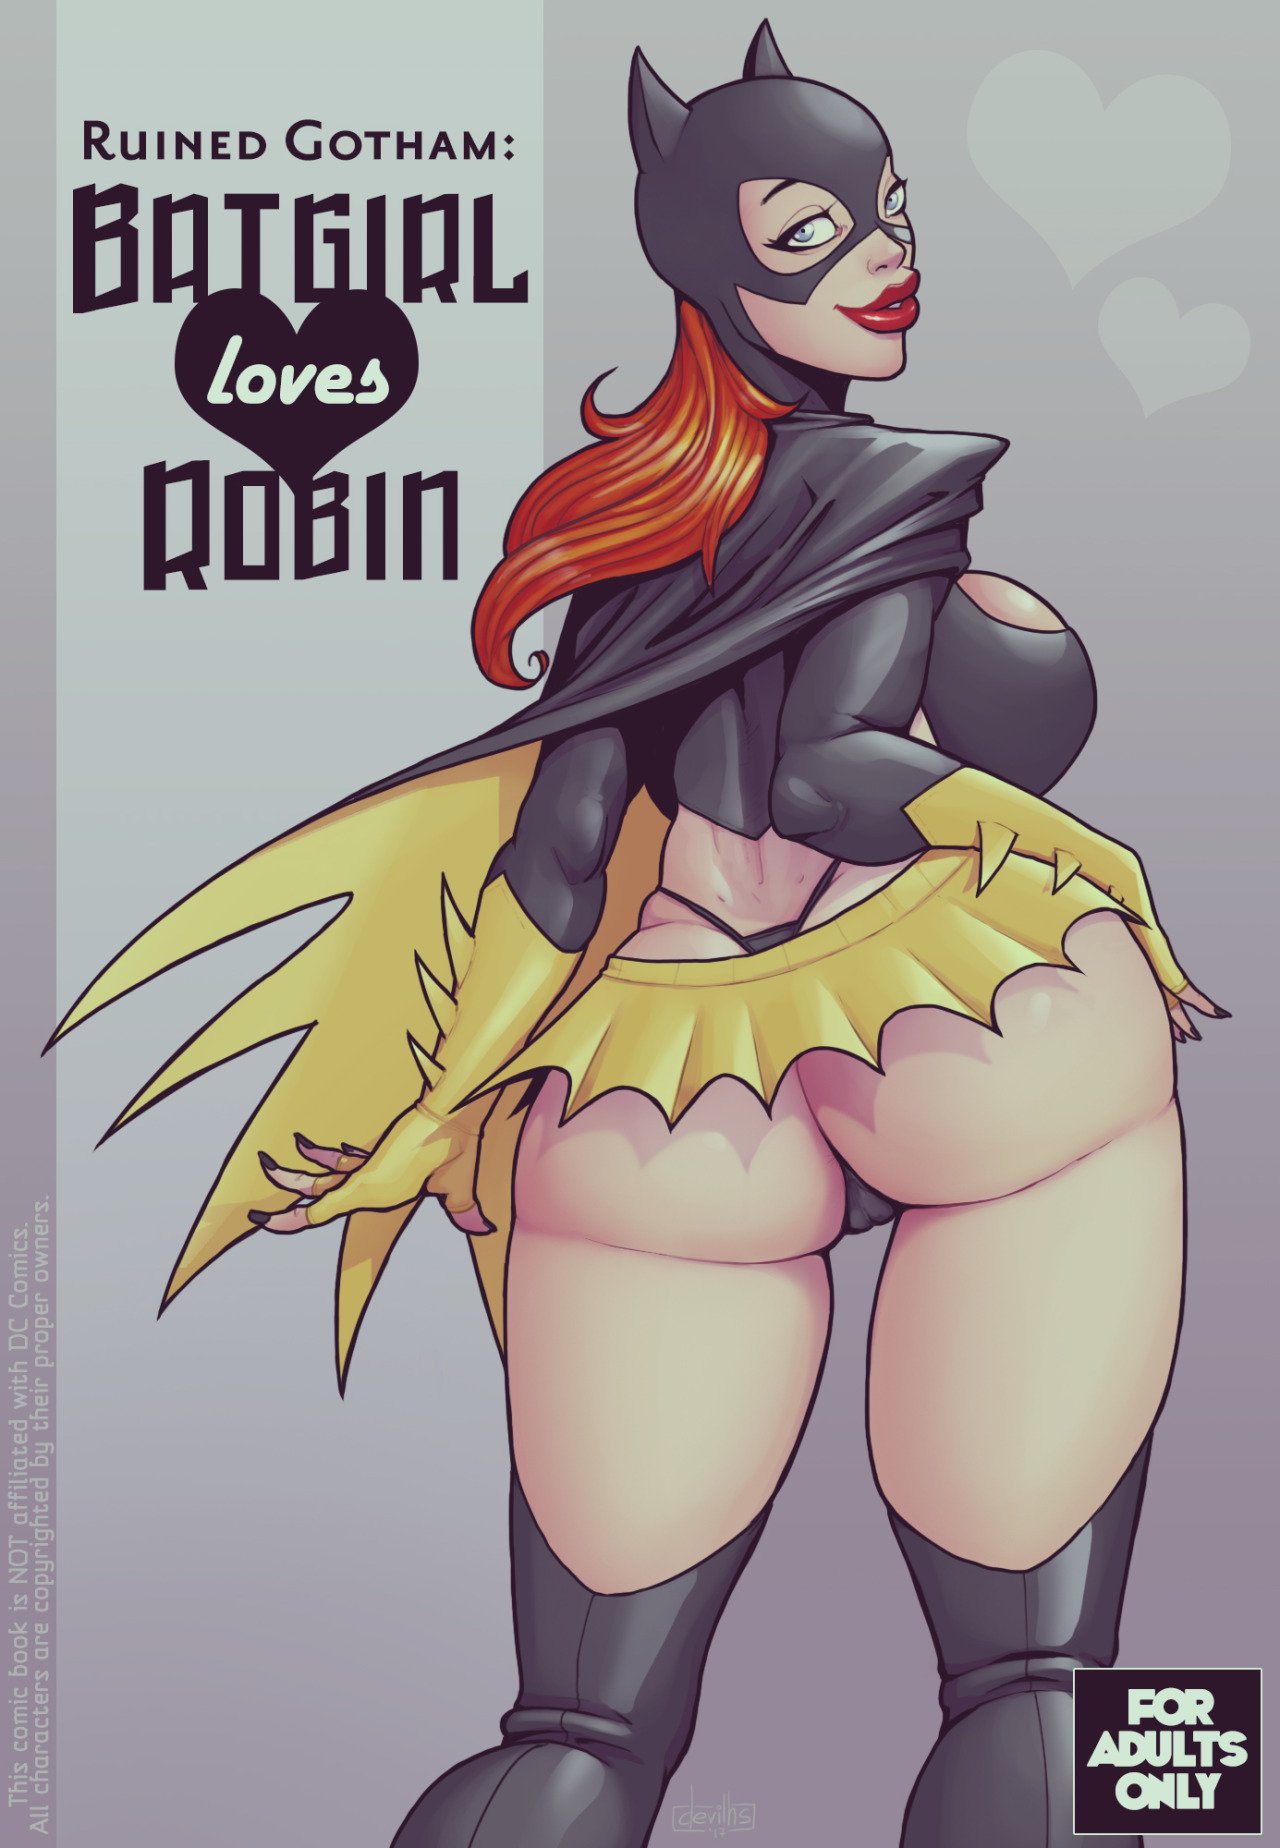 [Somehow complete] Ruined Gotham: Batgirl loves robin by DevilHS